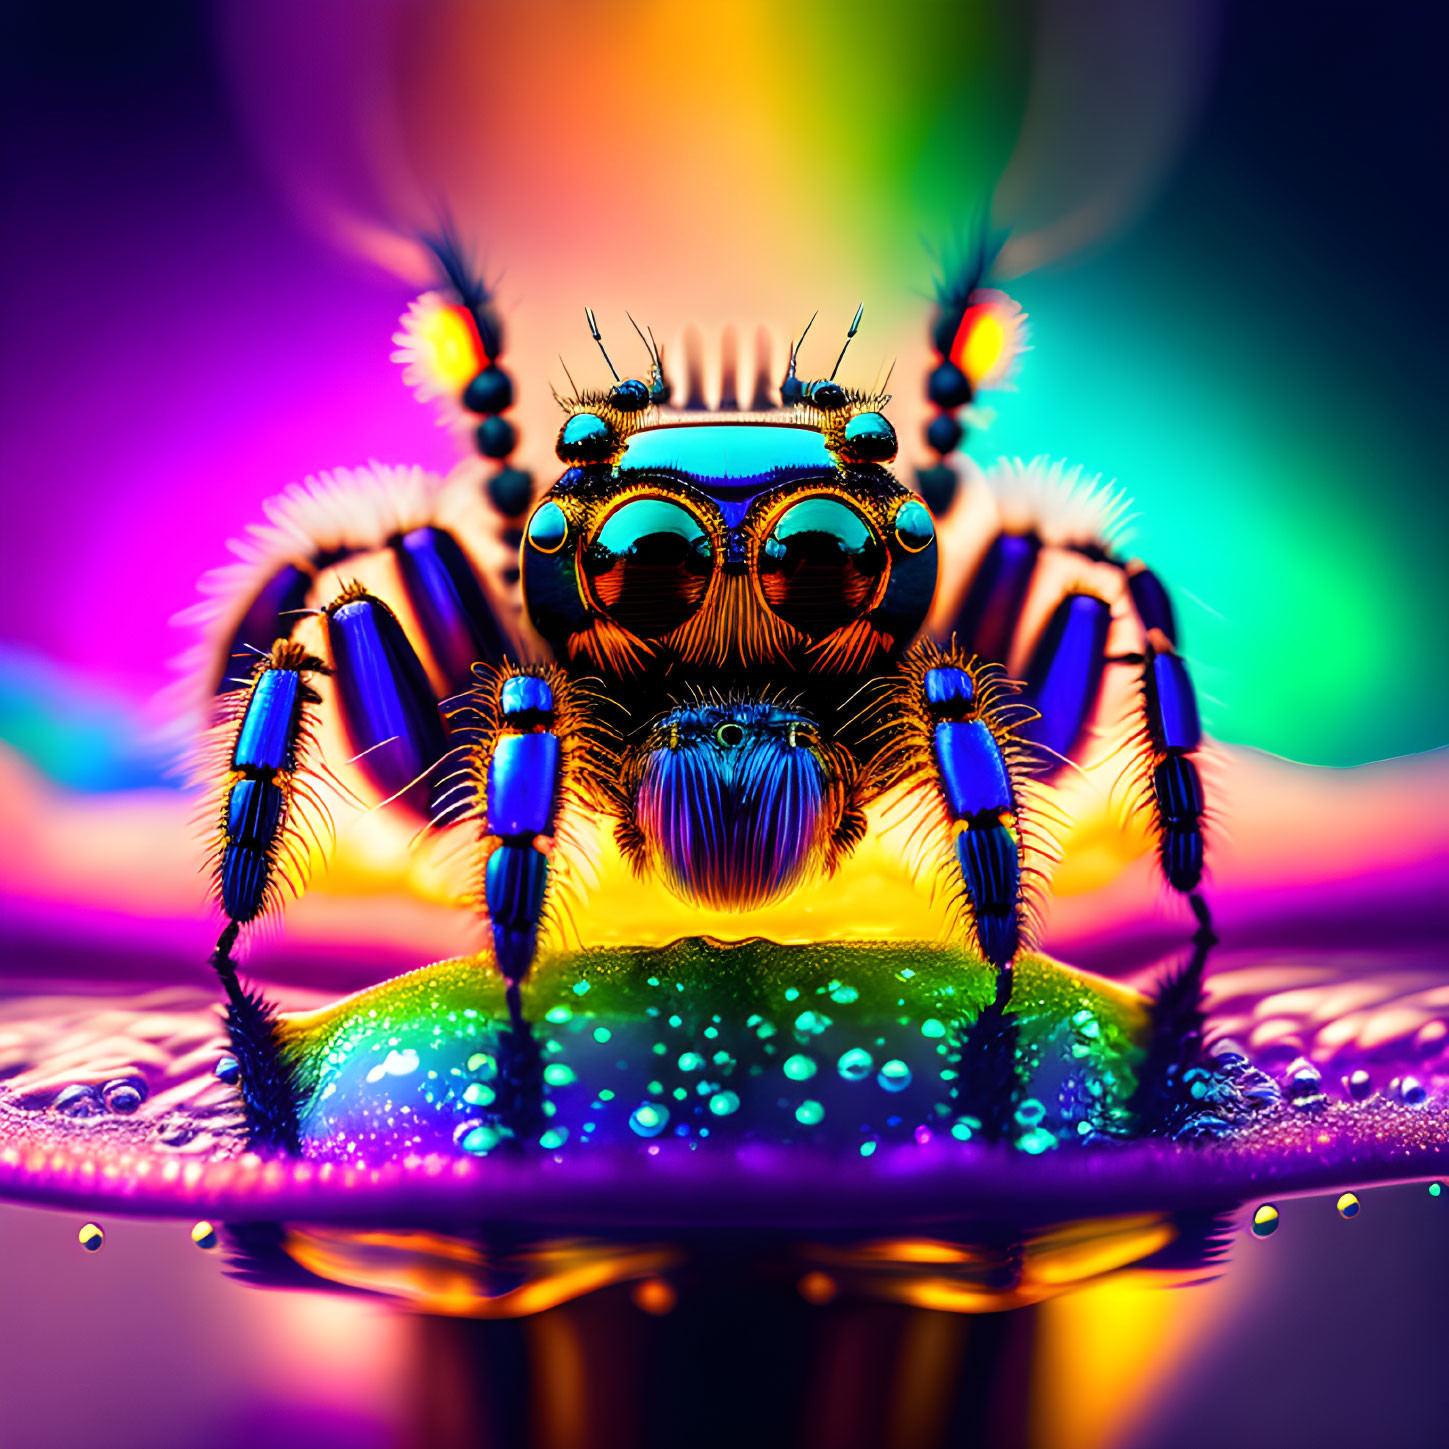 Colorful iridescent jumping spider on reflective surface with psychedelic background